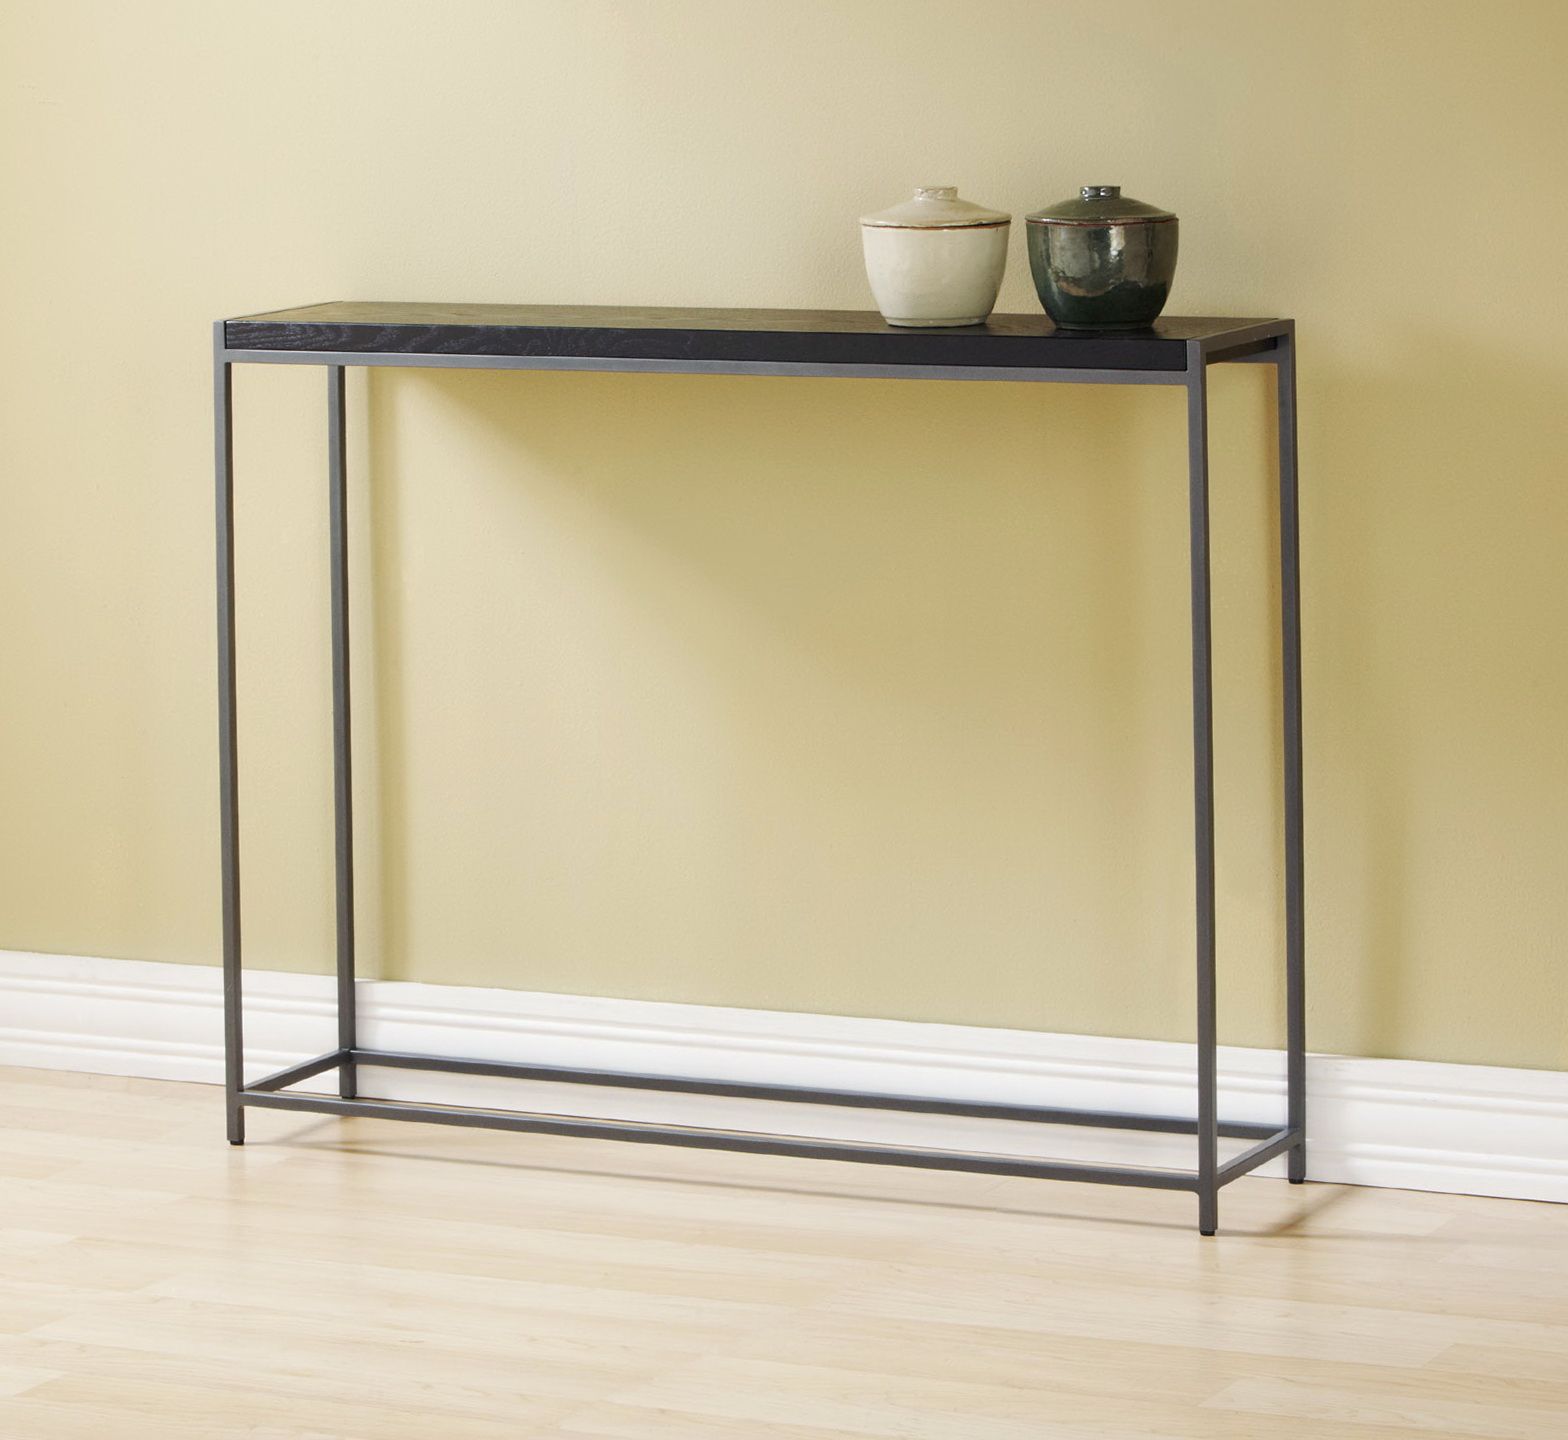 Very Thin Console Table | Home Design Ideas For Barnside Round Console Tables (View 20 of 20)